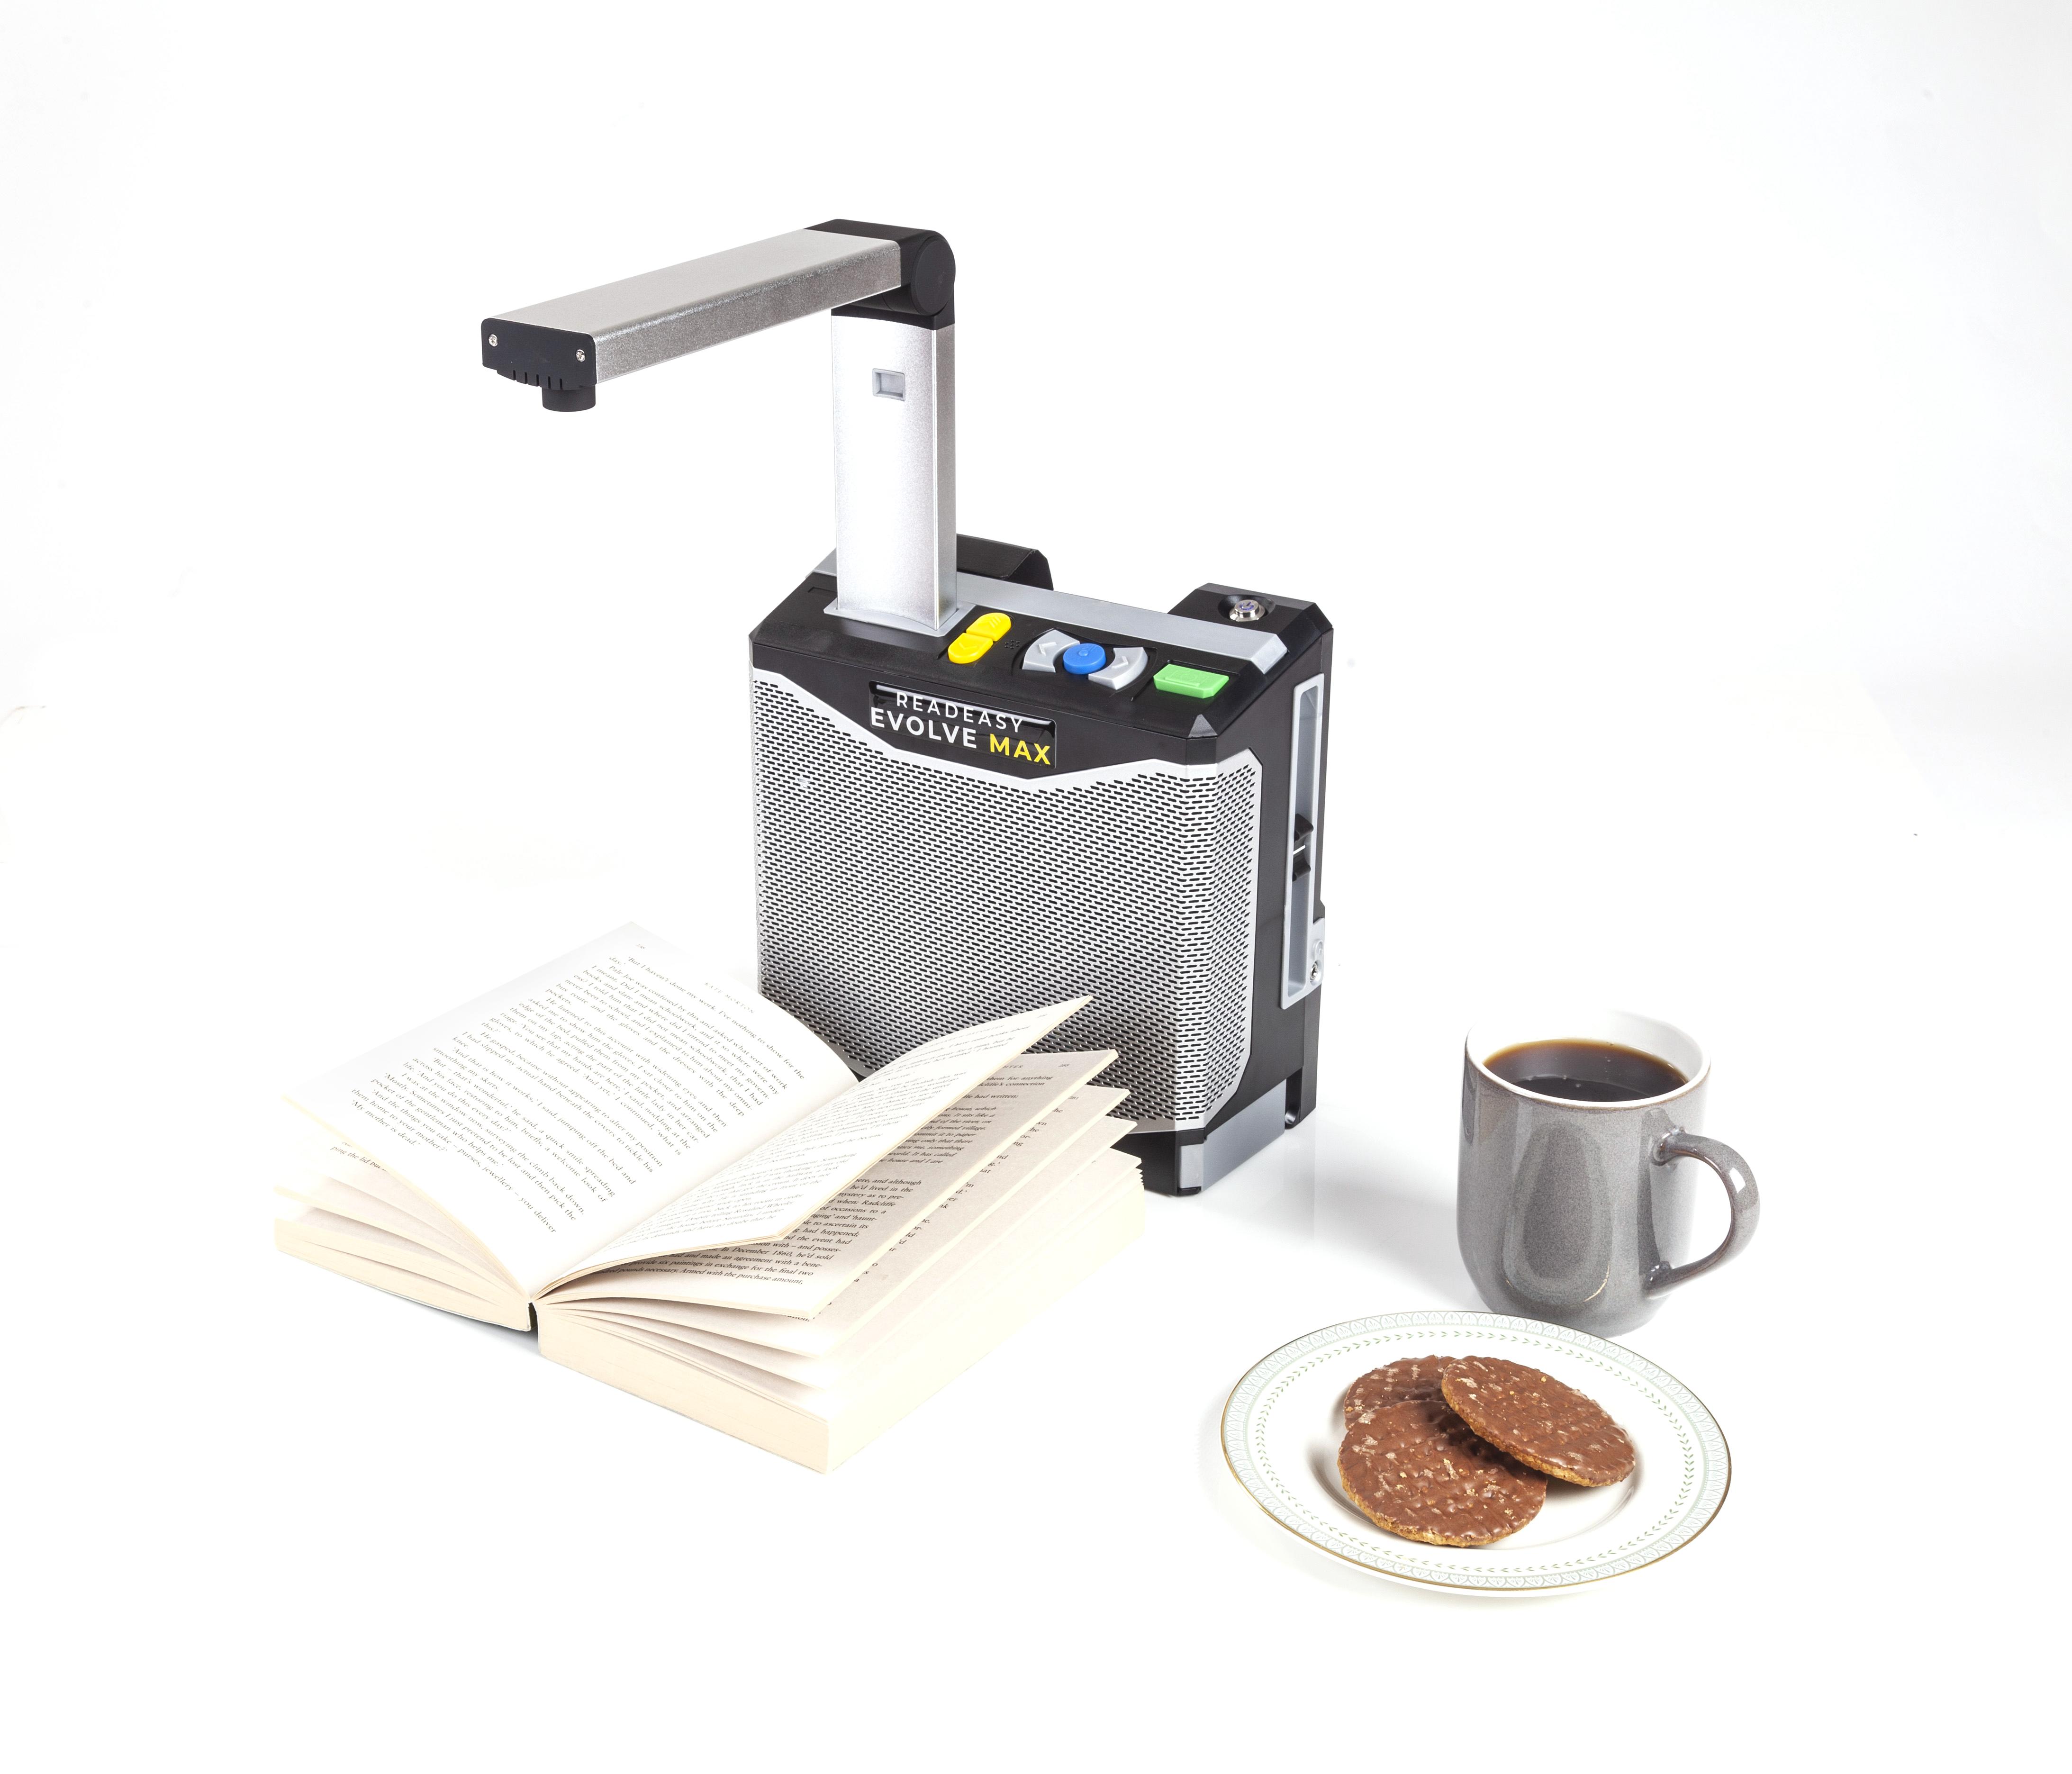 ReadEasy Evolve MAX capturing a book to the right of the readeasy evolve max is a grey mug of tea and a plate with 3 chocolate digestive biscuits